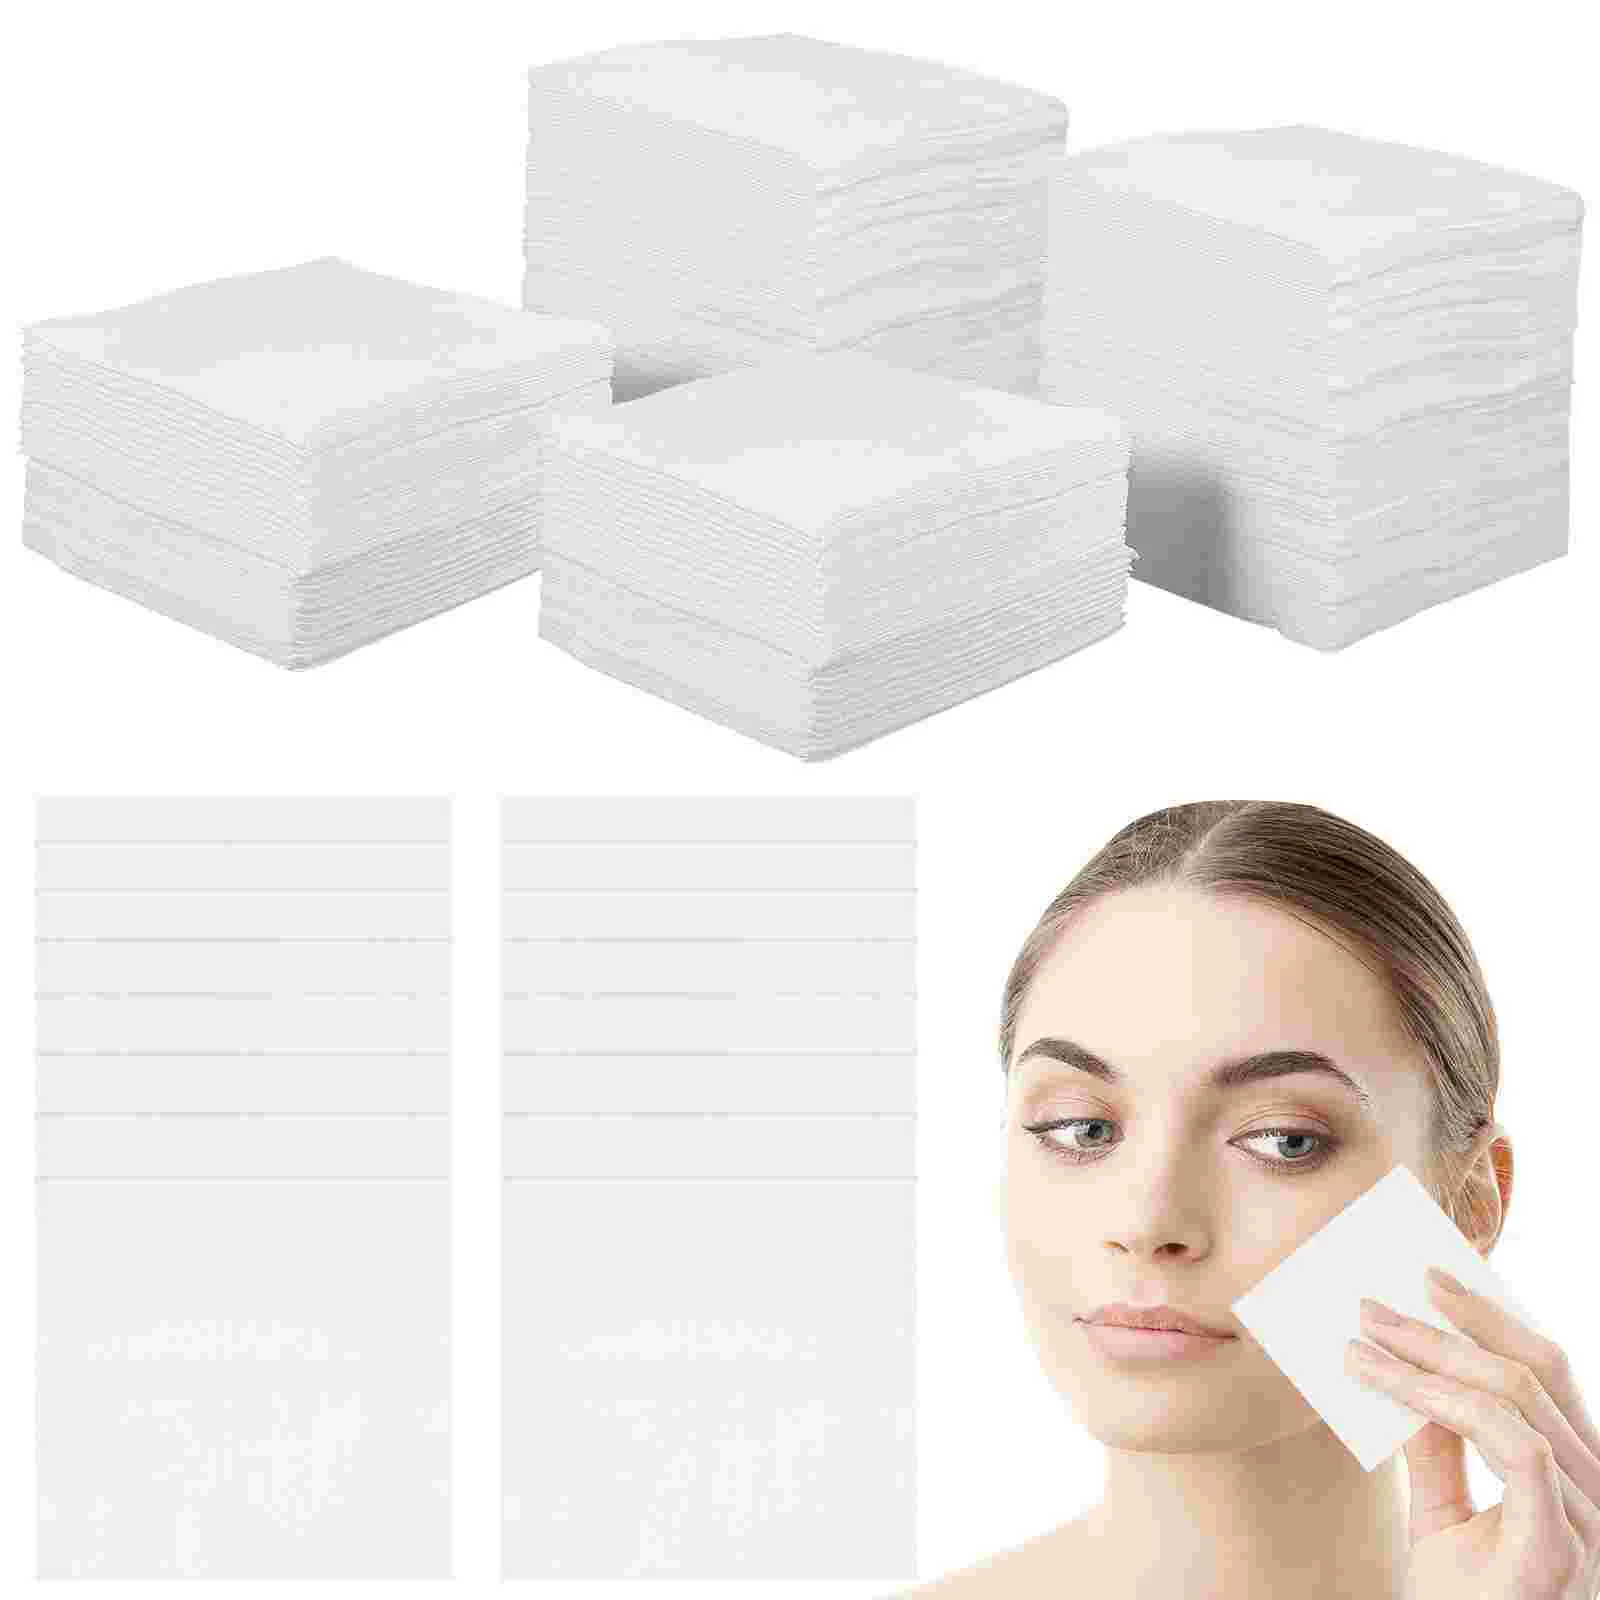 200 Pcs Multipurpose Easy To Use Square Cotton Pads Facial Cleansing Makeup Sheets Nail Polished Pads